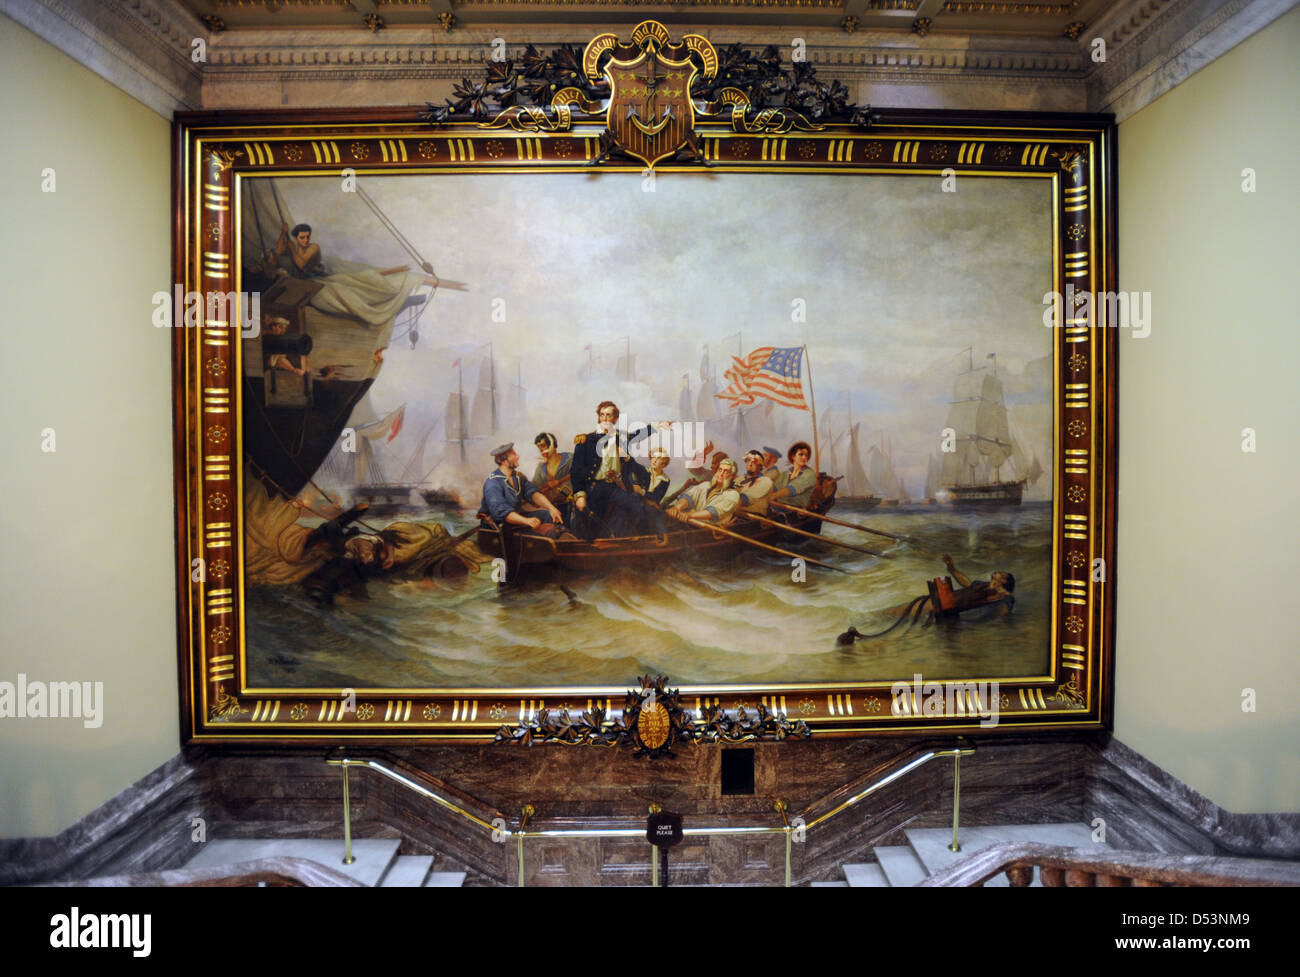 Battle of Lake Erie 1813 painting second floor US Capitol Washington DC by William H. Powell, Battle of Lake Erie, Stock Photo